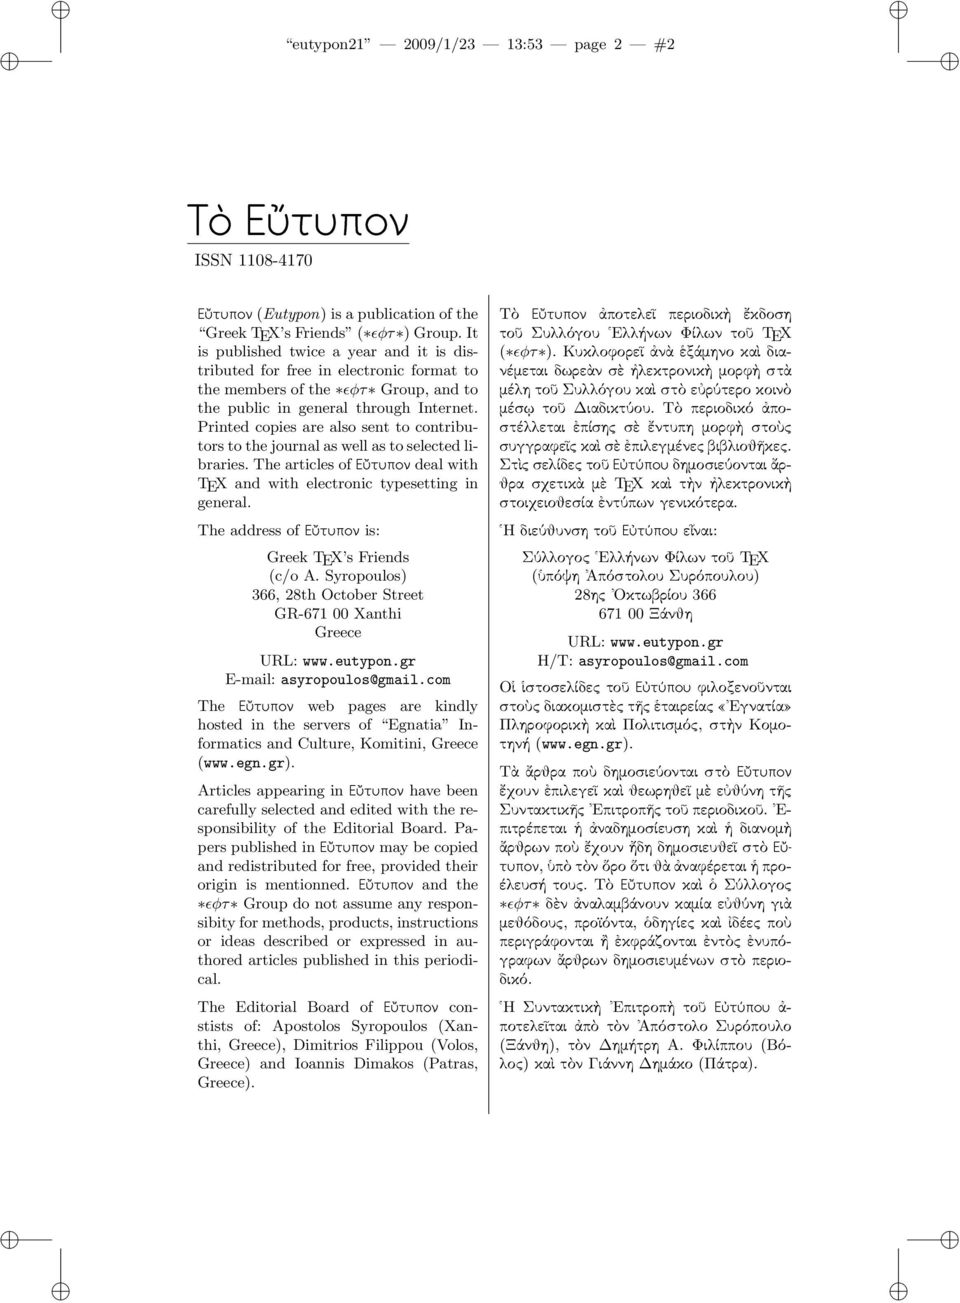 Printed copies are also sent to contributors to the journal as well as to selected libraries. The articles of Útupon deal with TX and with electronic typesetting in general.